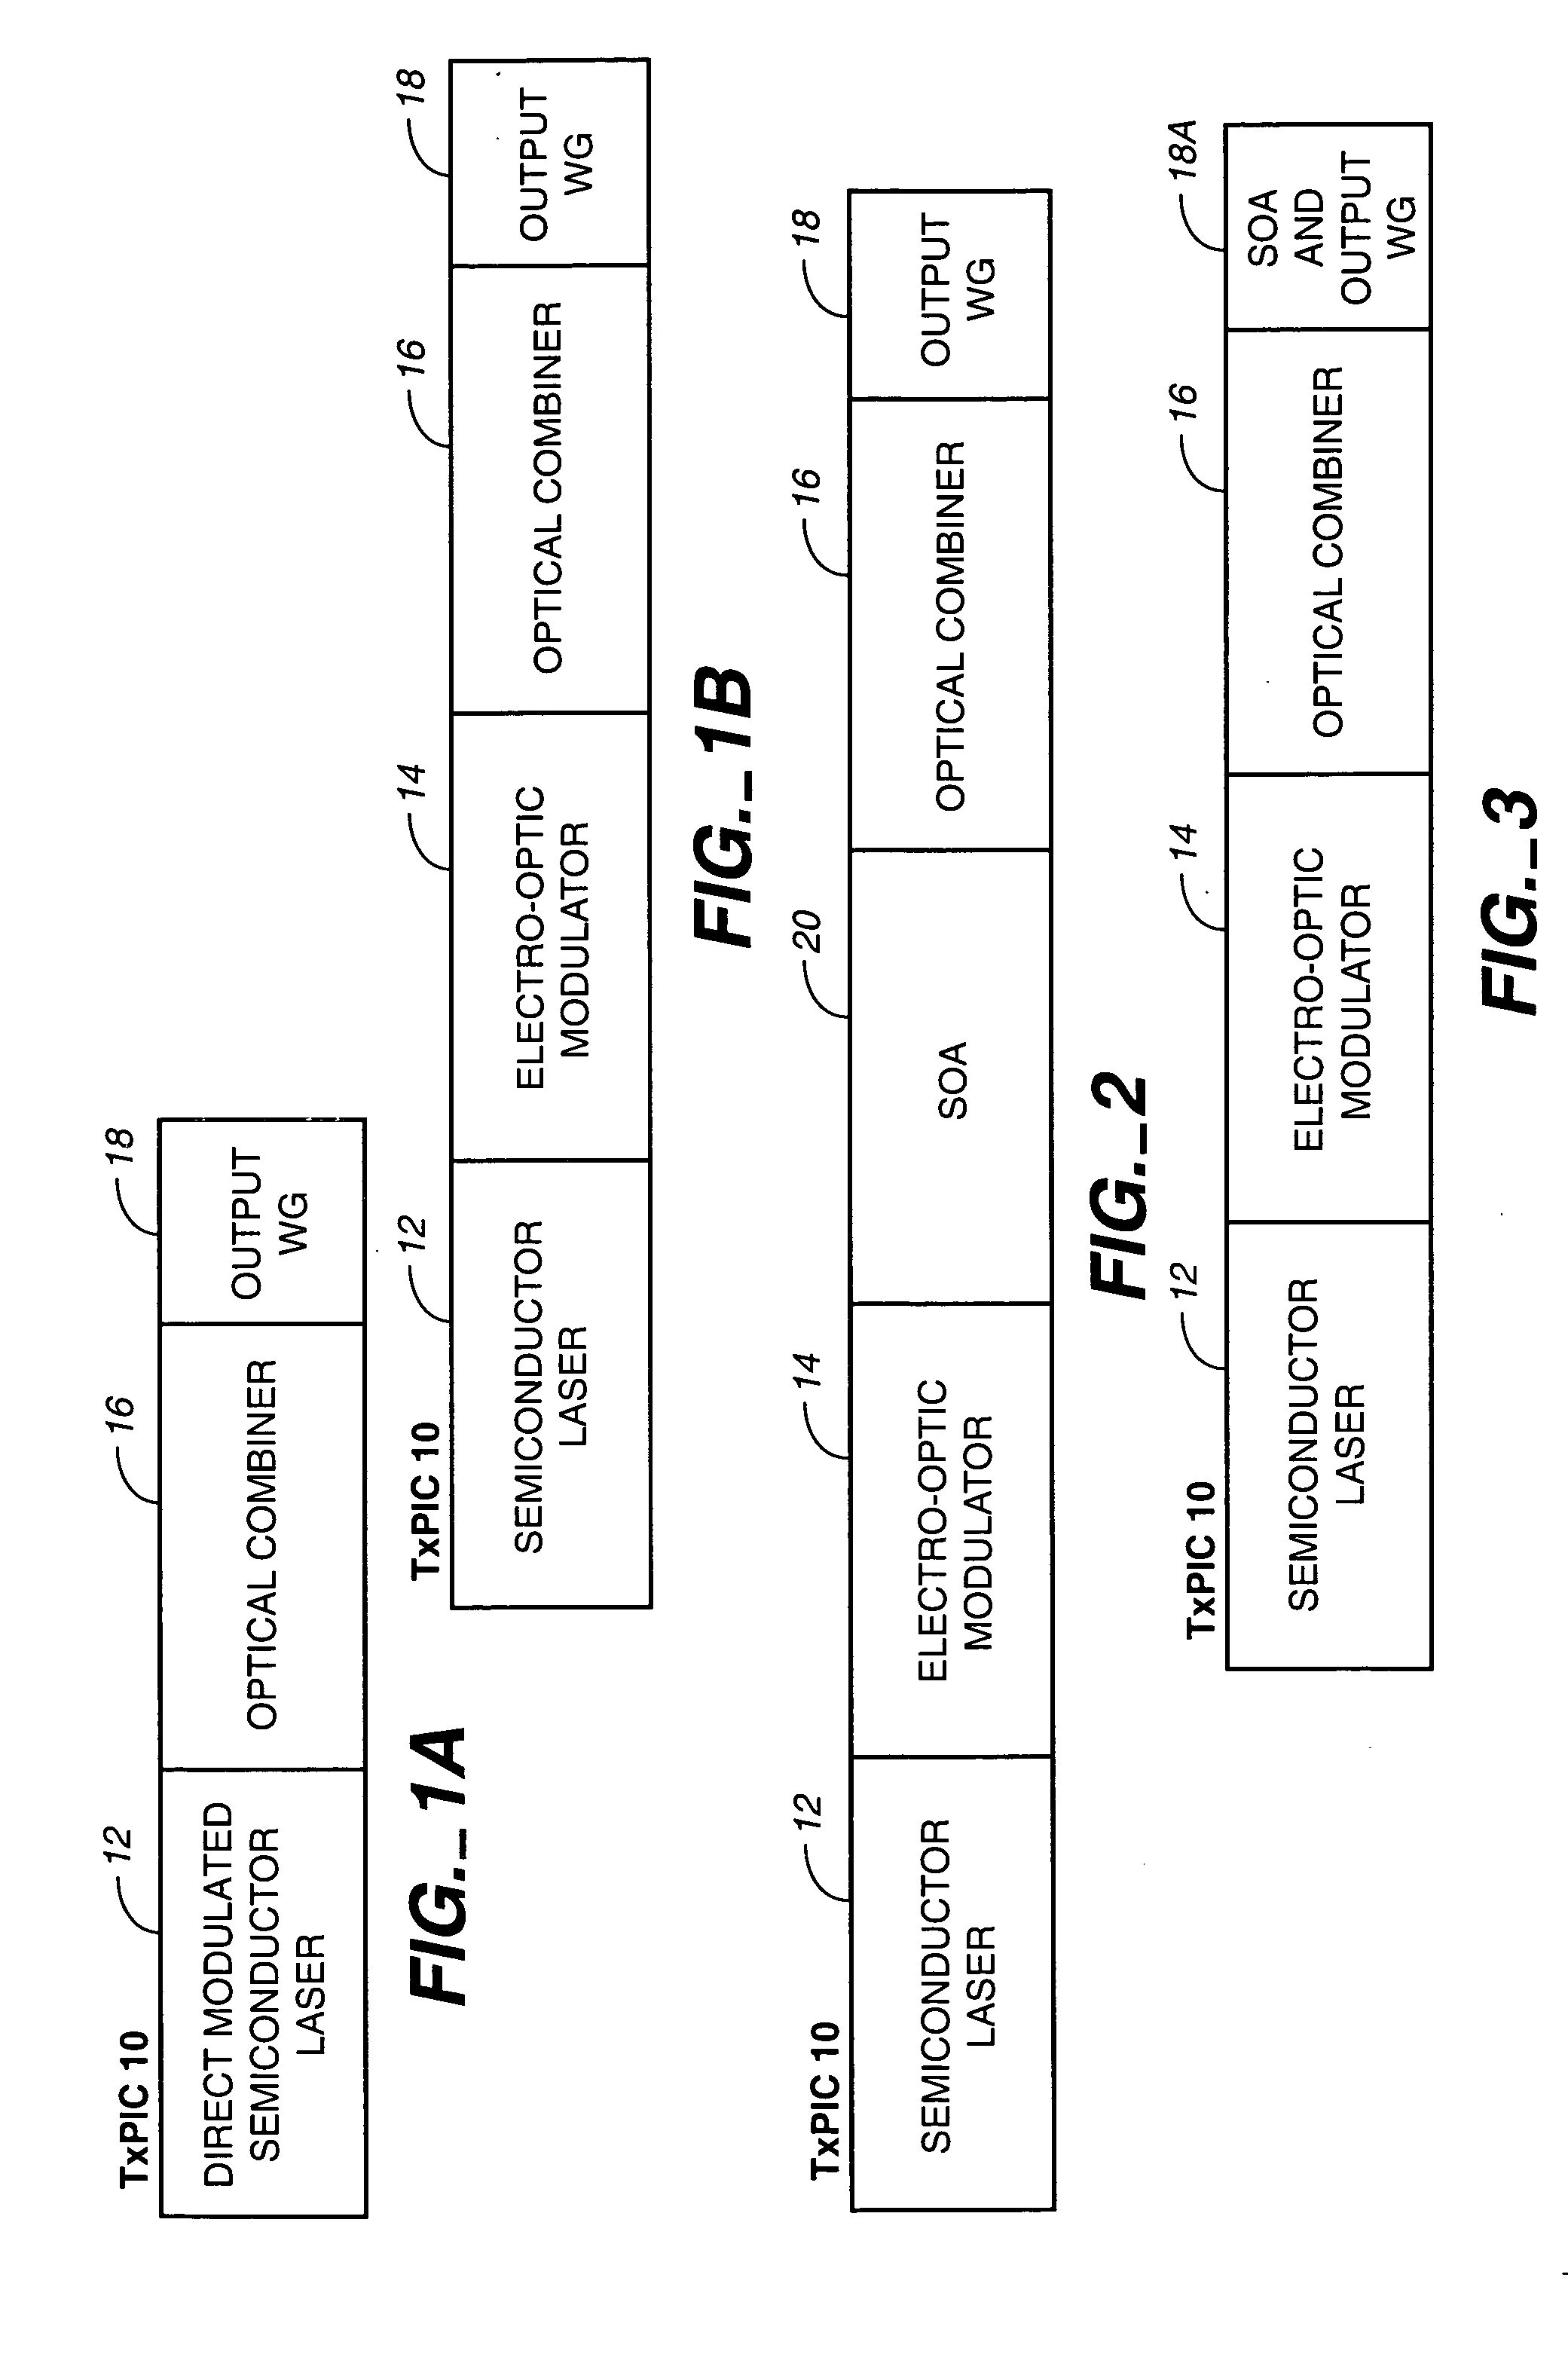 Method and apparatus for providing an antireflection coating on the output facet of a photonic integrated circuit (PIC) chip